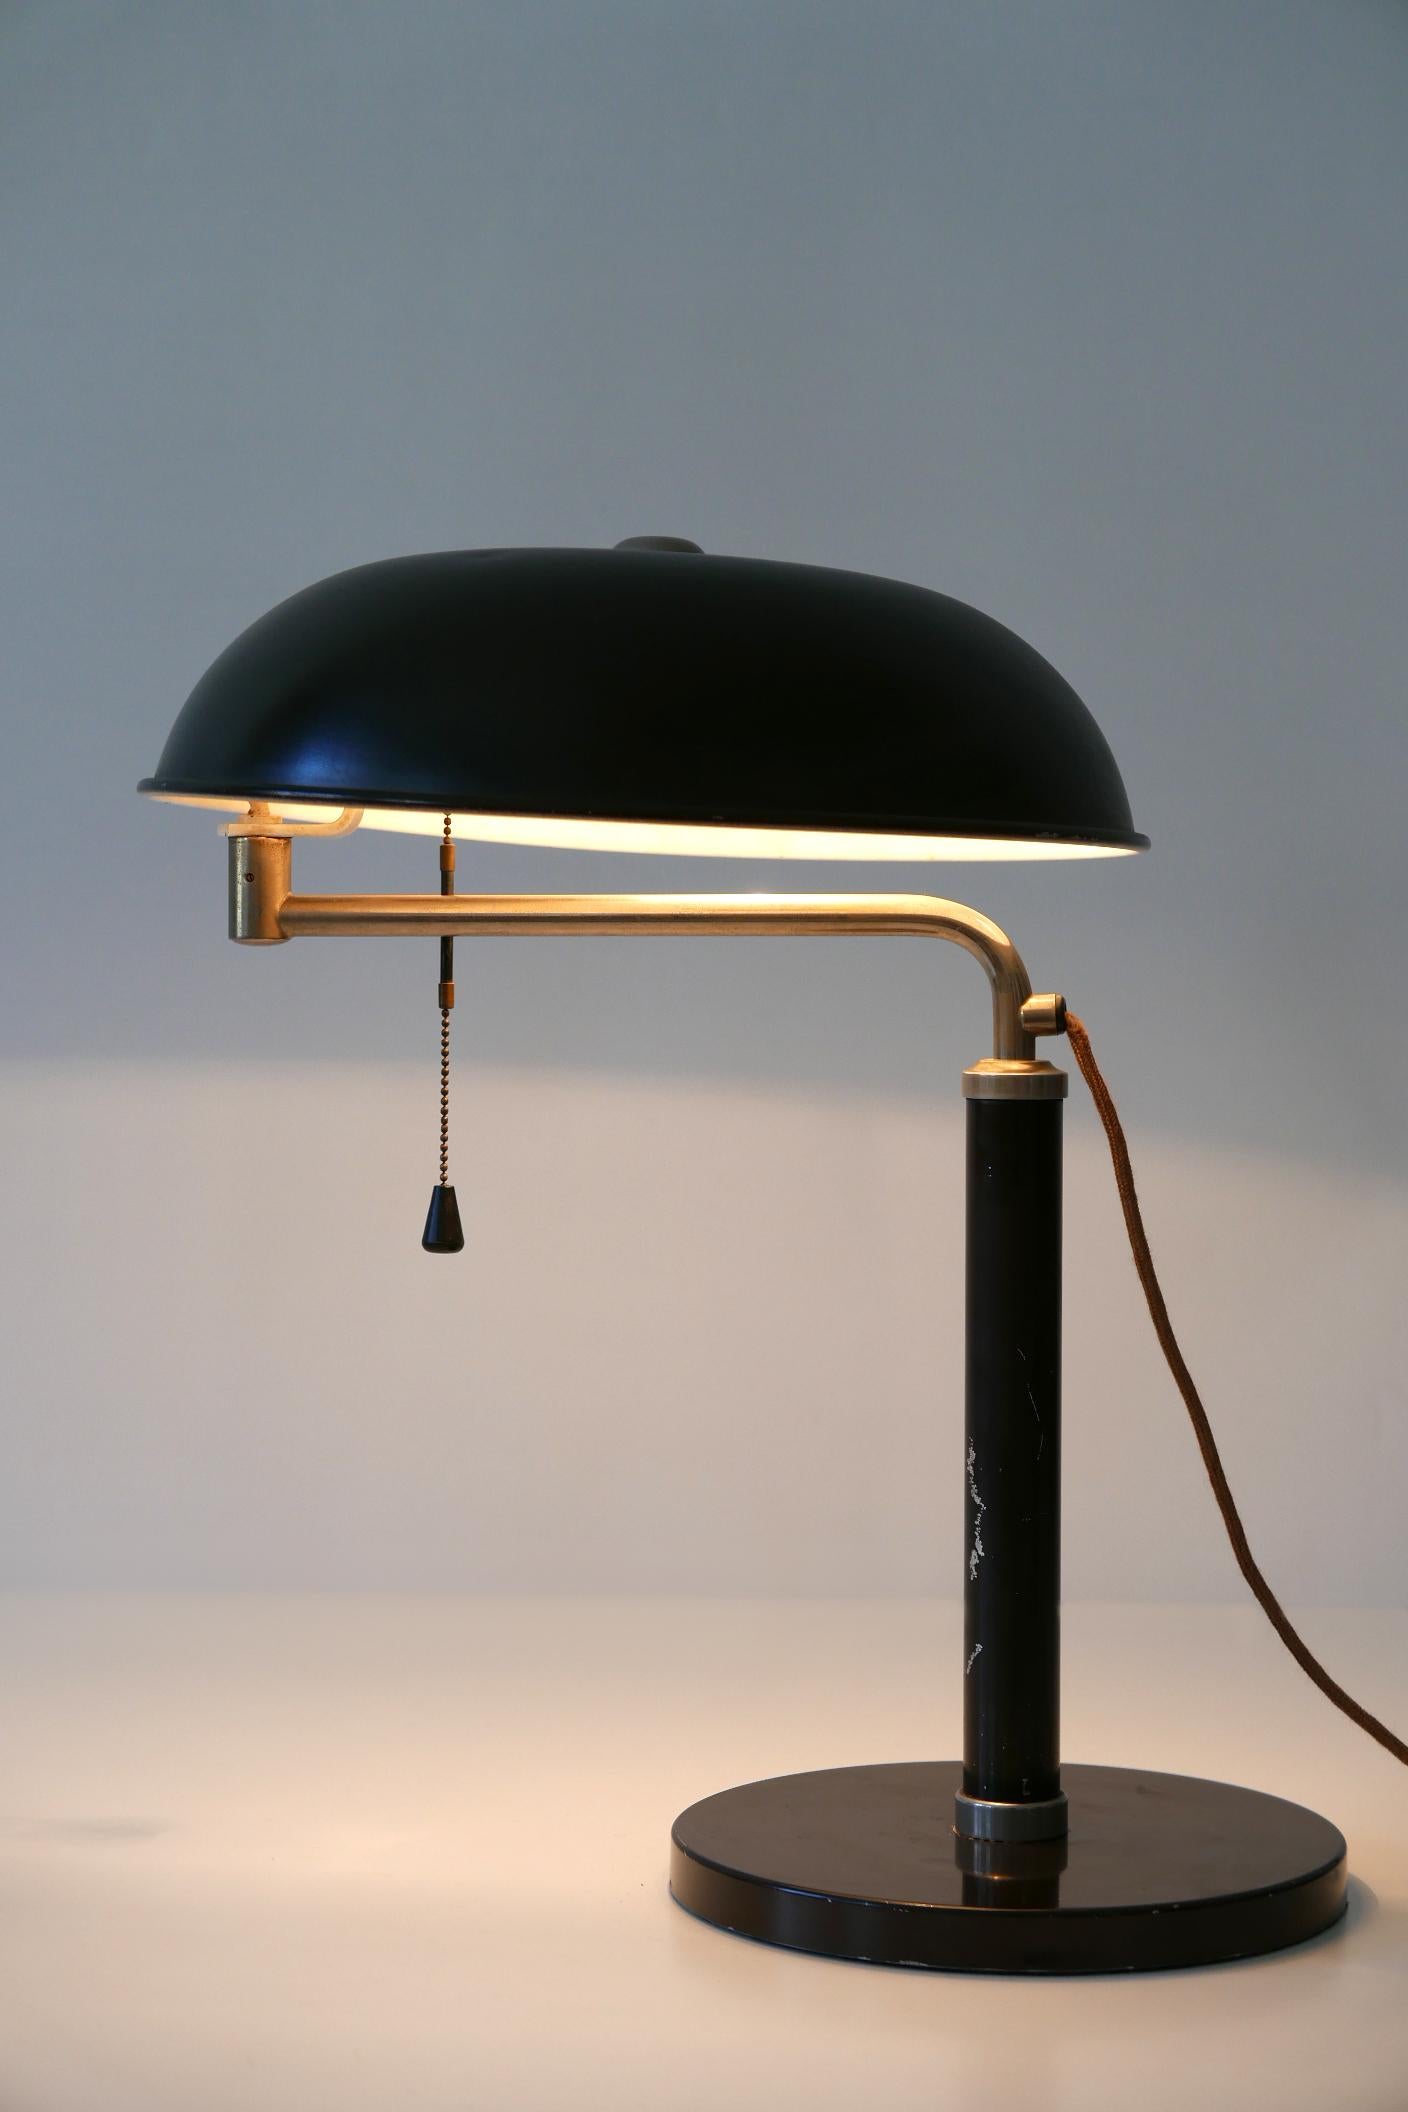 Cast Articulated Bauhaus Table Lamp Quick 1500 by Alfred Müller for Amba, 1930s